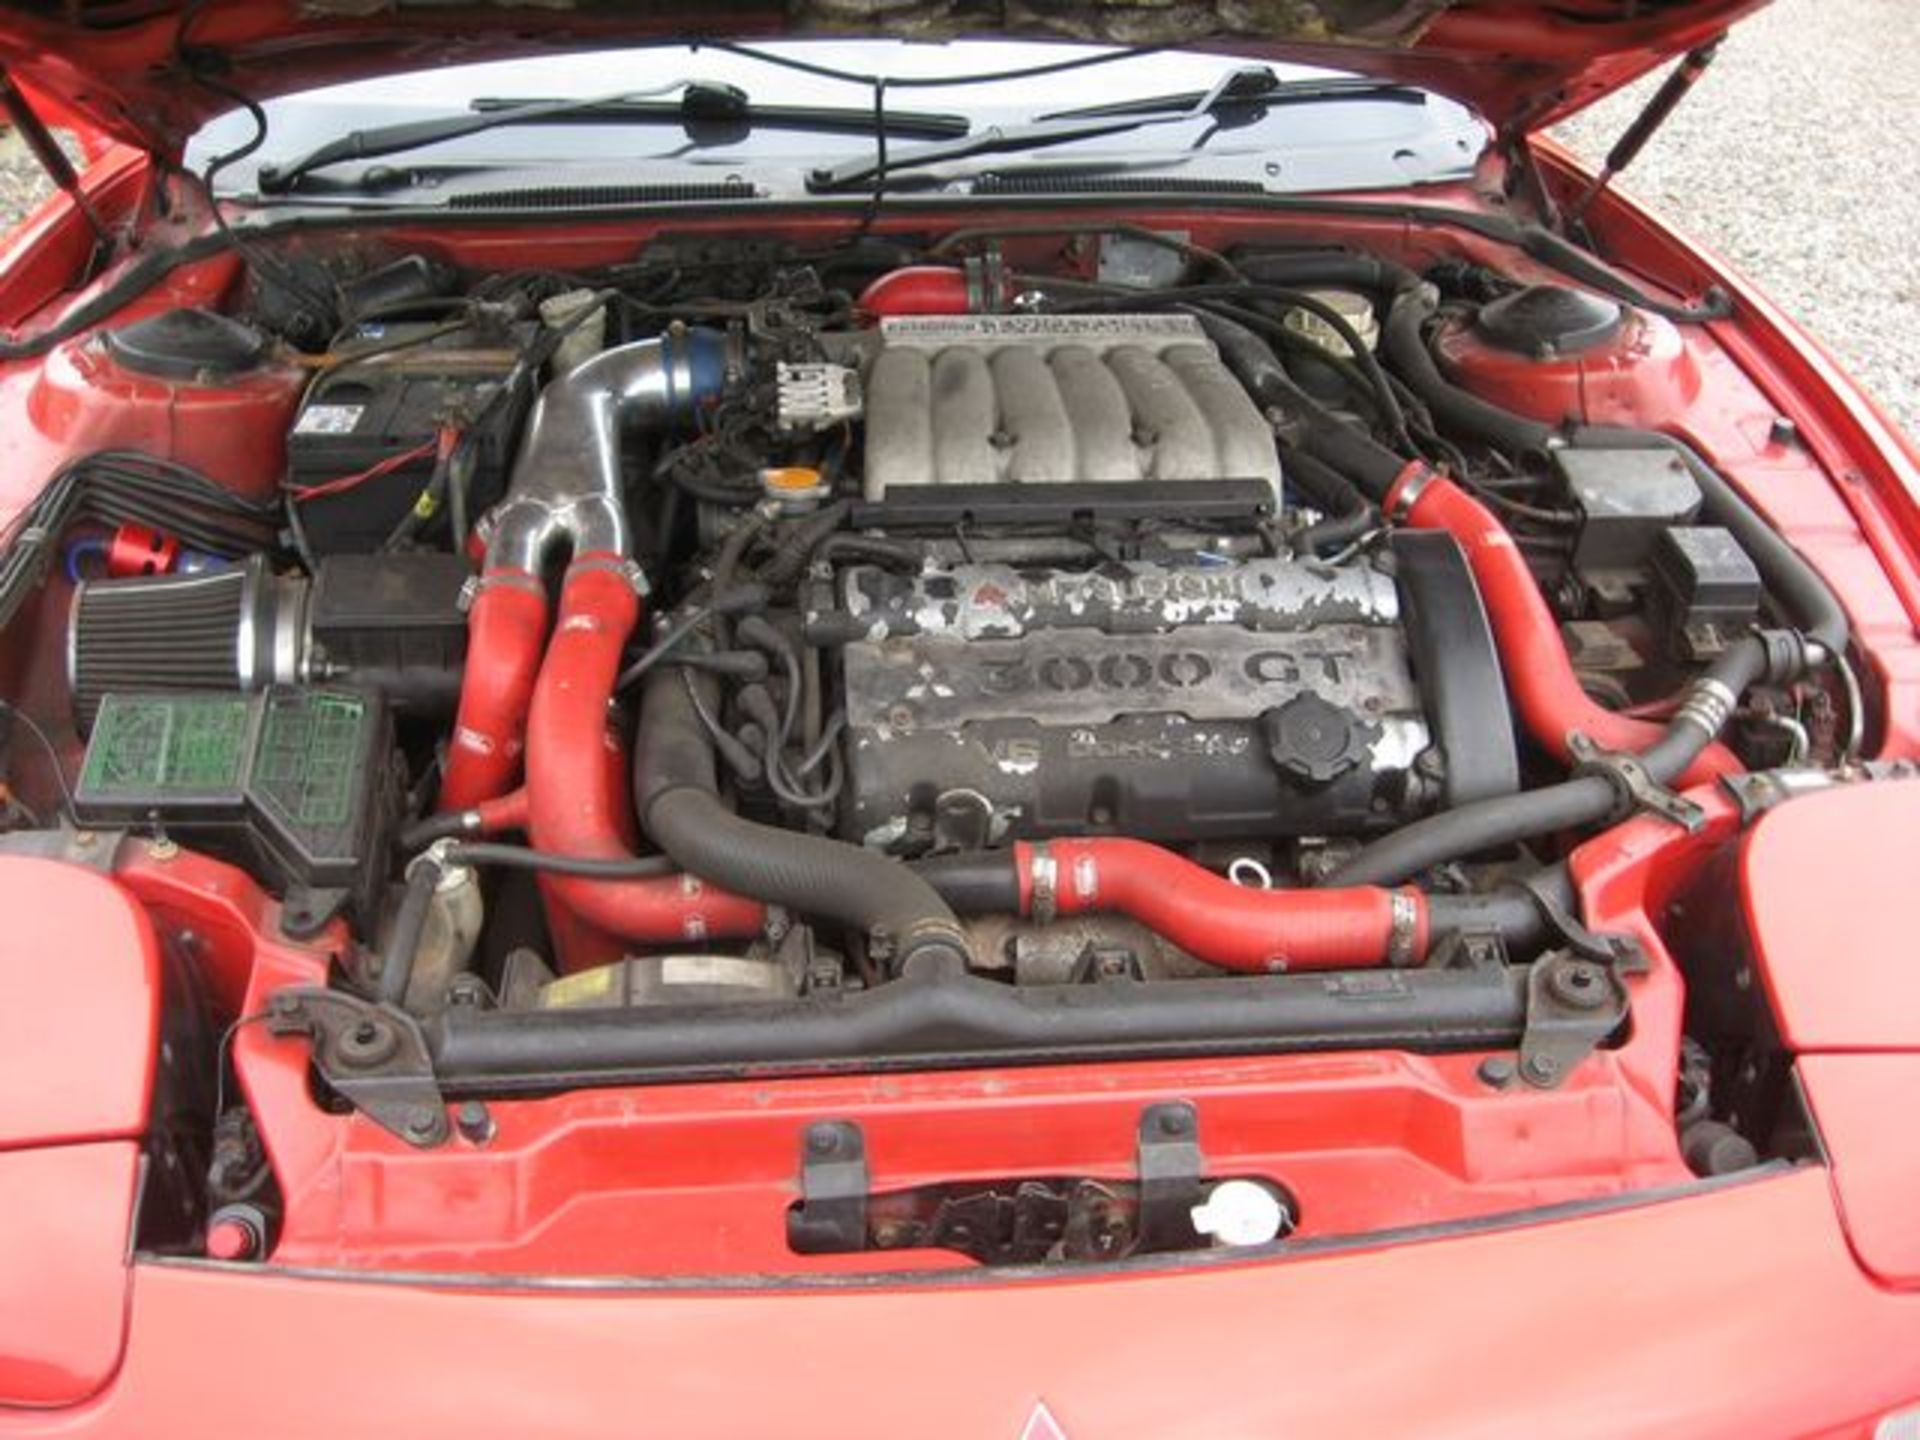 MITSUBISHI, 3000 GT V6 TURBO - 2972cc, Chassis number JMAMNZ16APY000228 - presented with an - Image 14 of 17